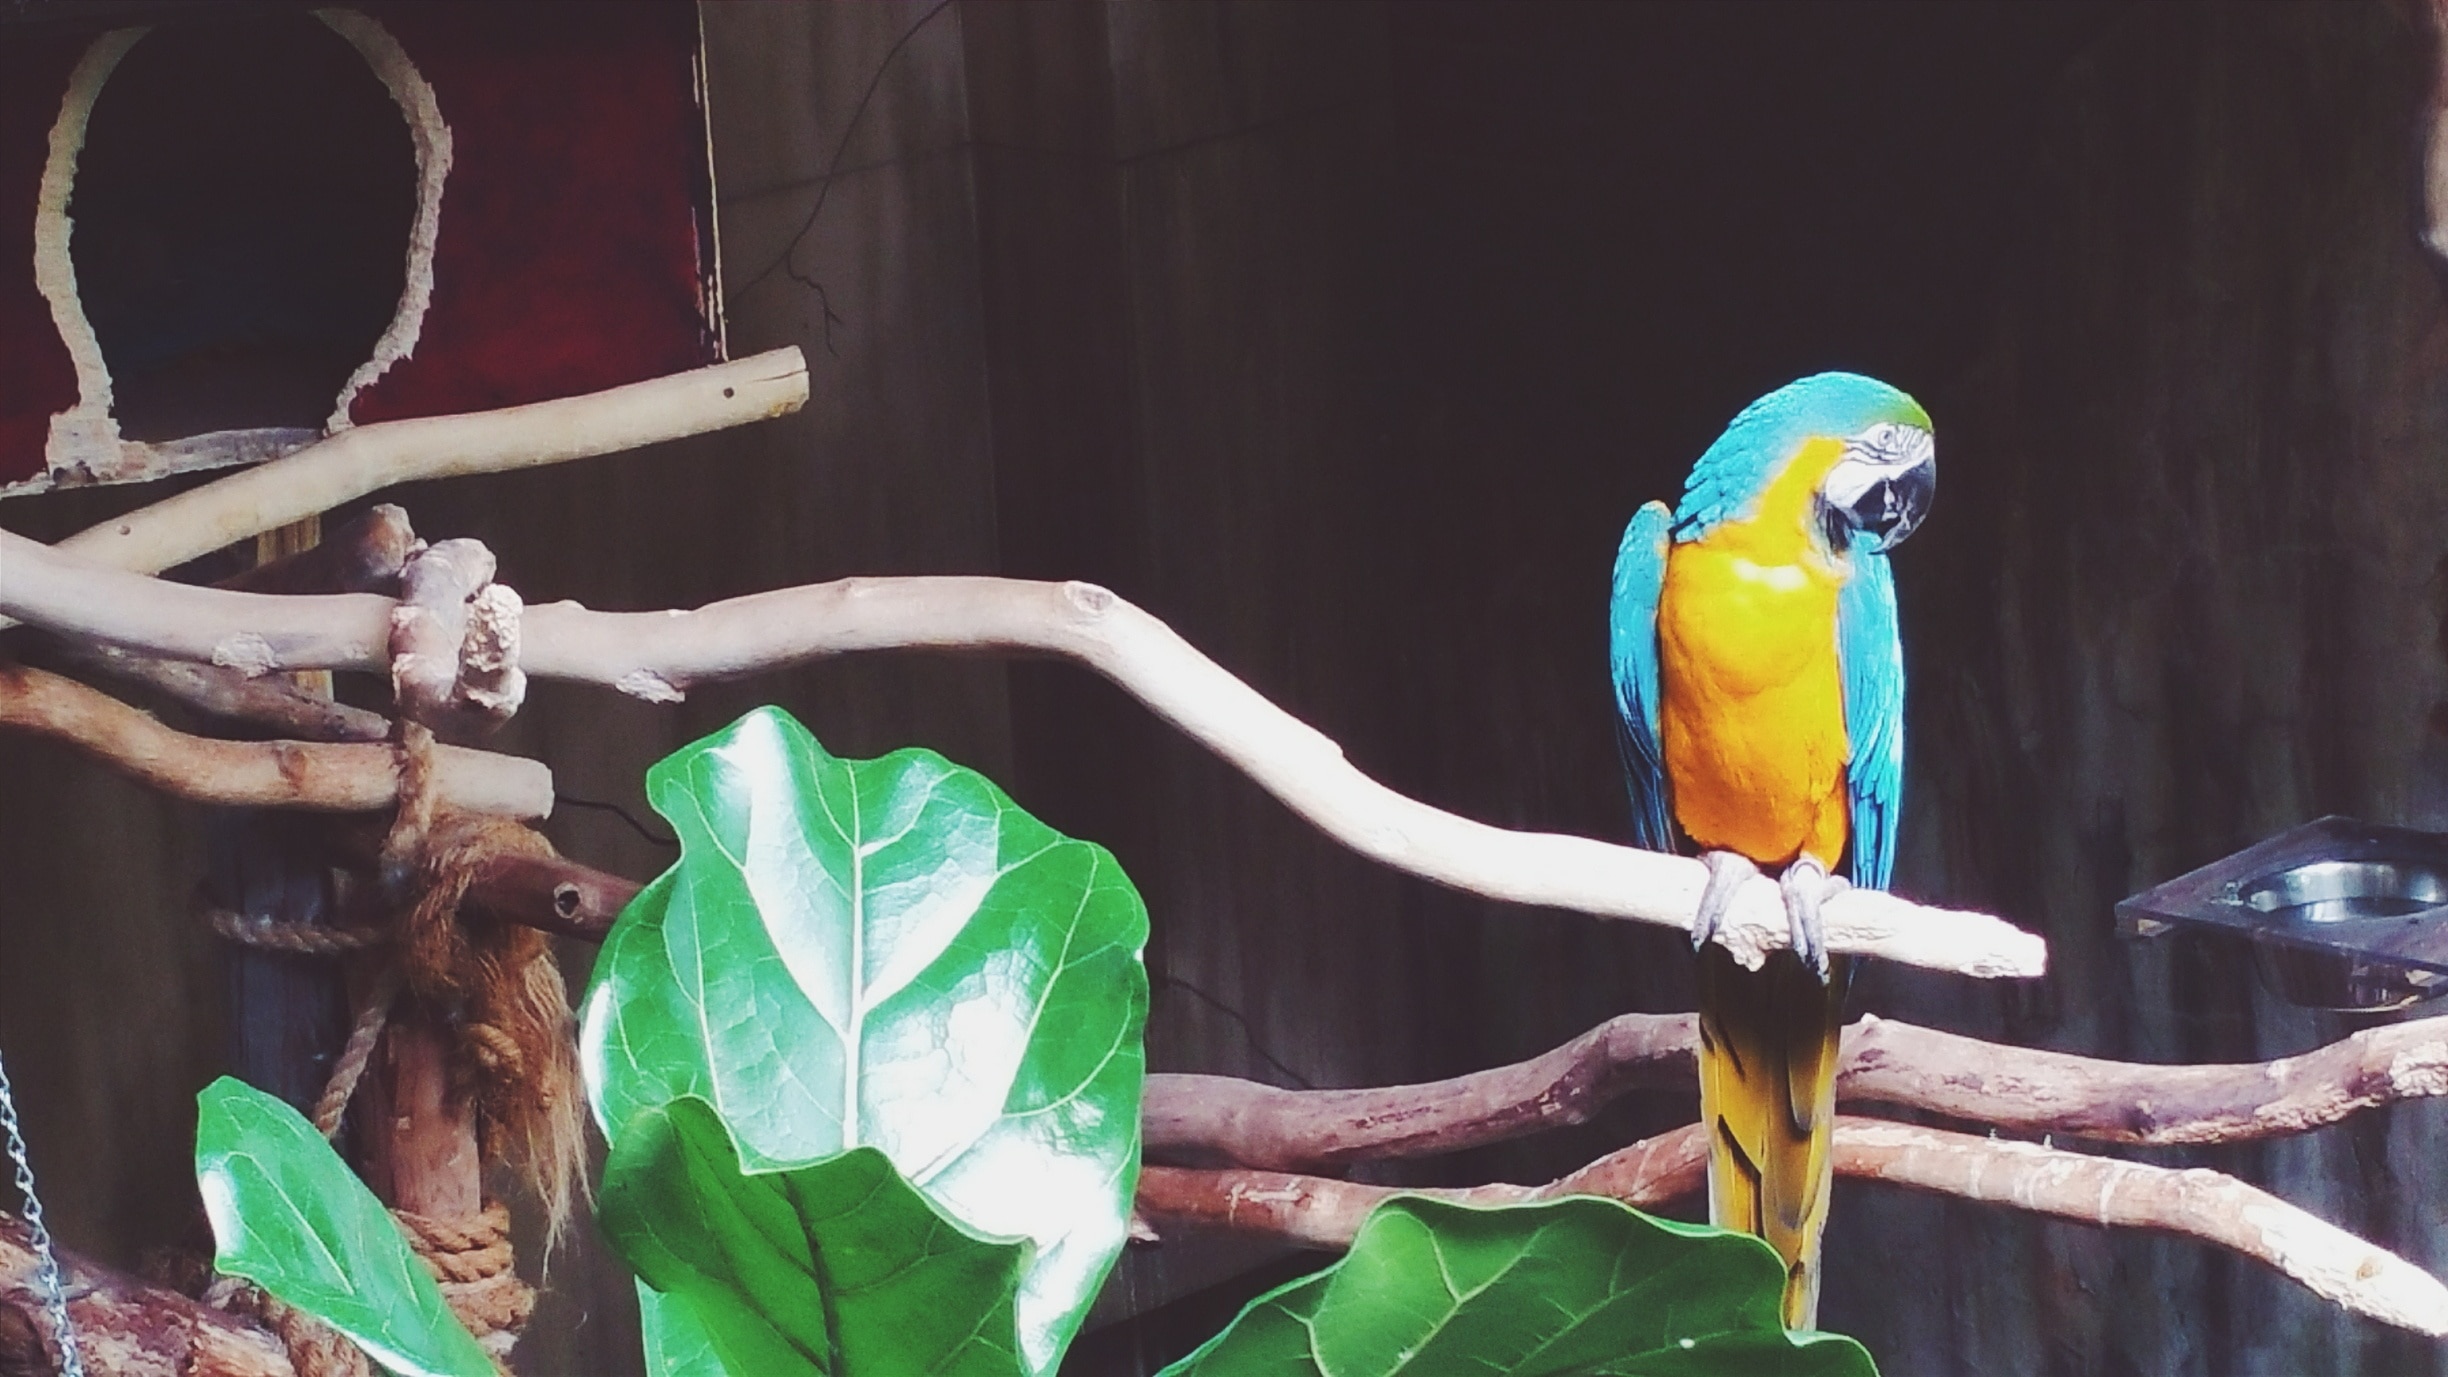 Discover exotic birds in the largest indoor free-flying aviary in the world! In addition check out the small bird aviary, the night jungle and explorer's base camp. #niagarafalls #niagara #ontario #yourstodiscover #birds #macaw #parrots #adventure  #blueandgold #aviary #fly #jungle #bats #owls #exotic #photographer #photography 